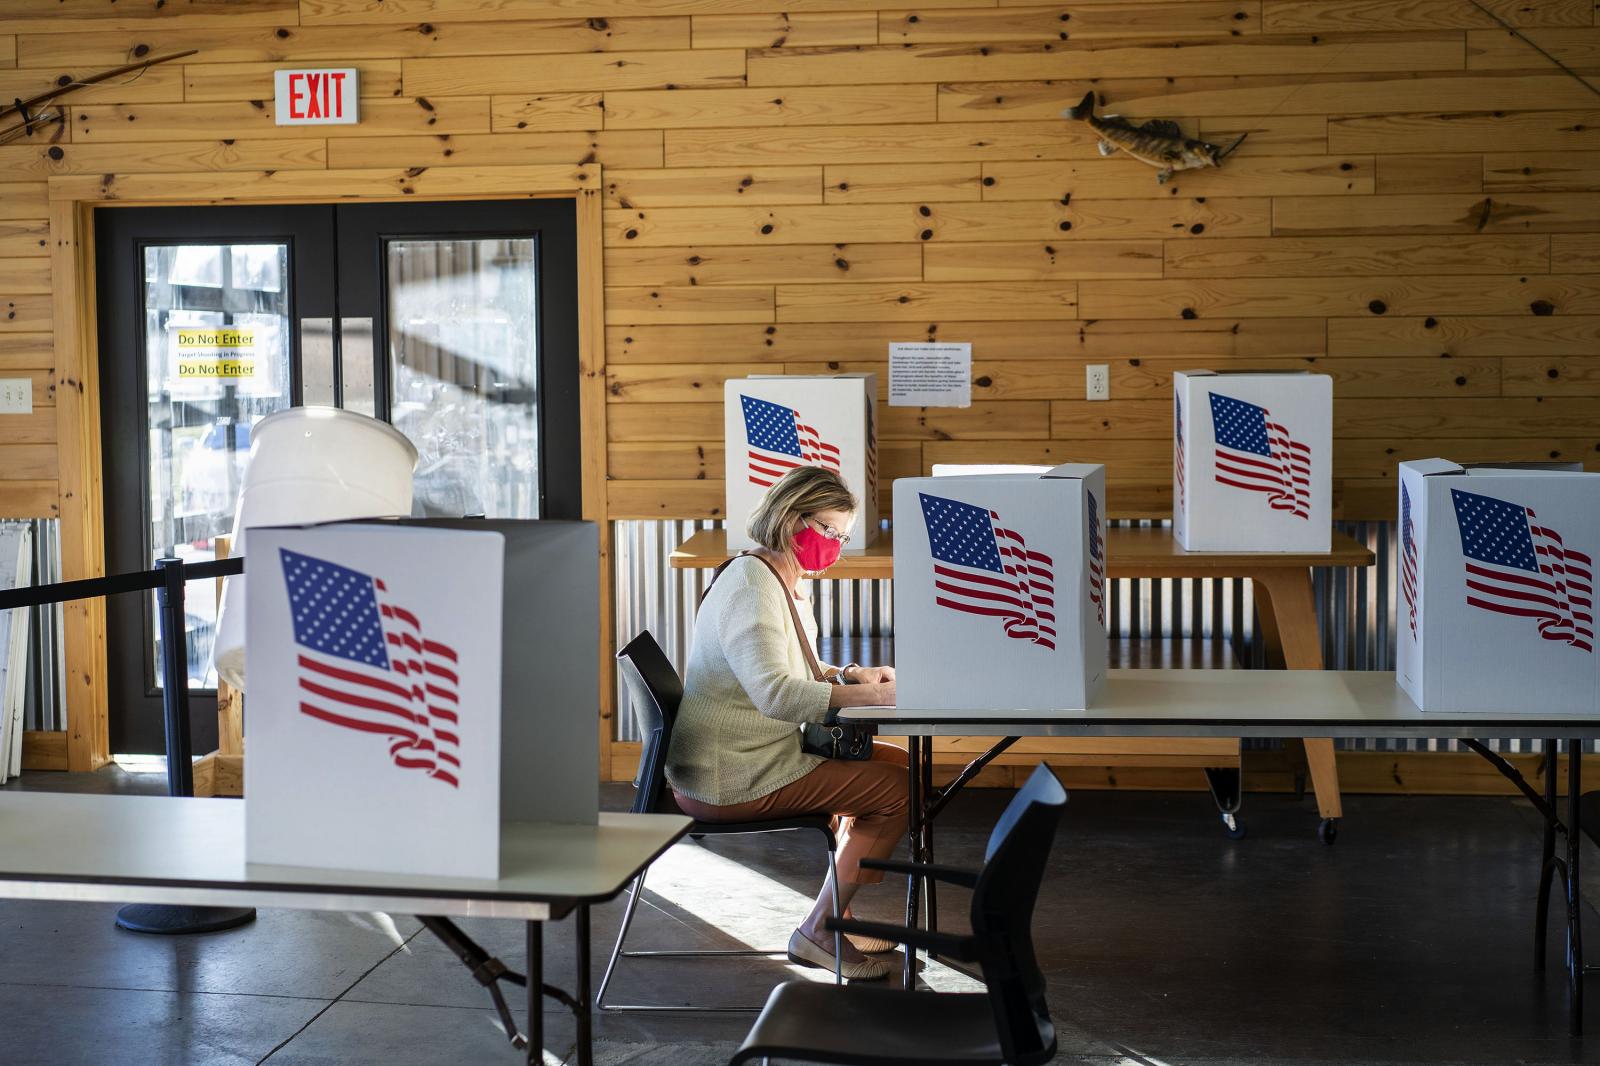 Image from Politics - Cindy Spellberg of Granger, Iowa casts her vote on...